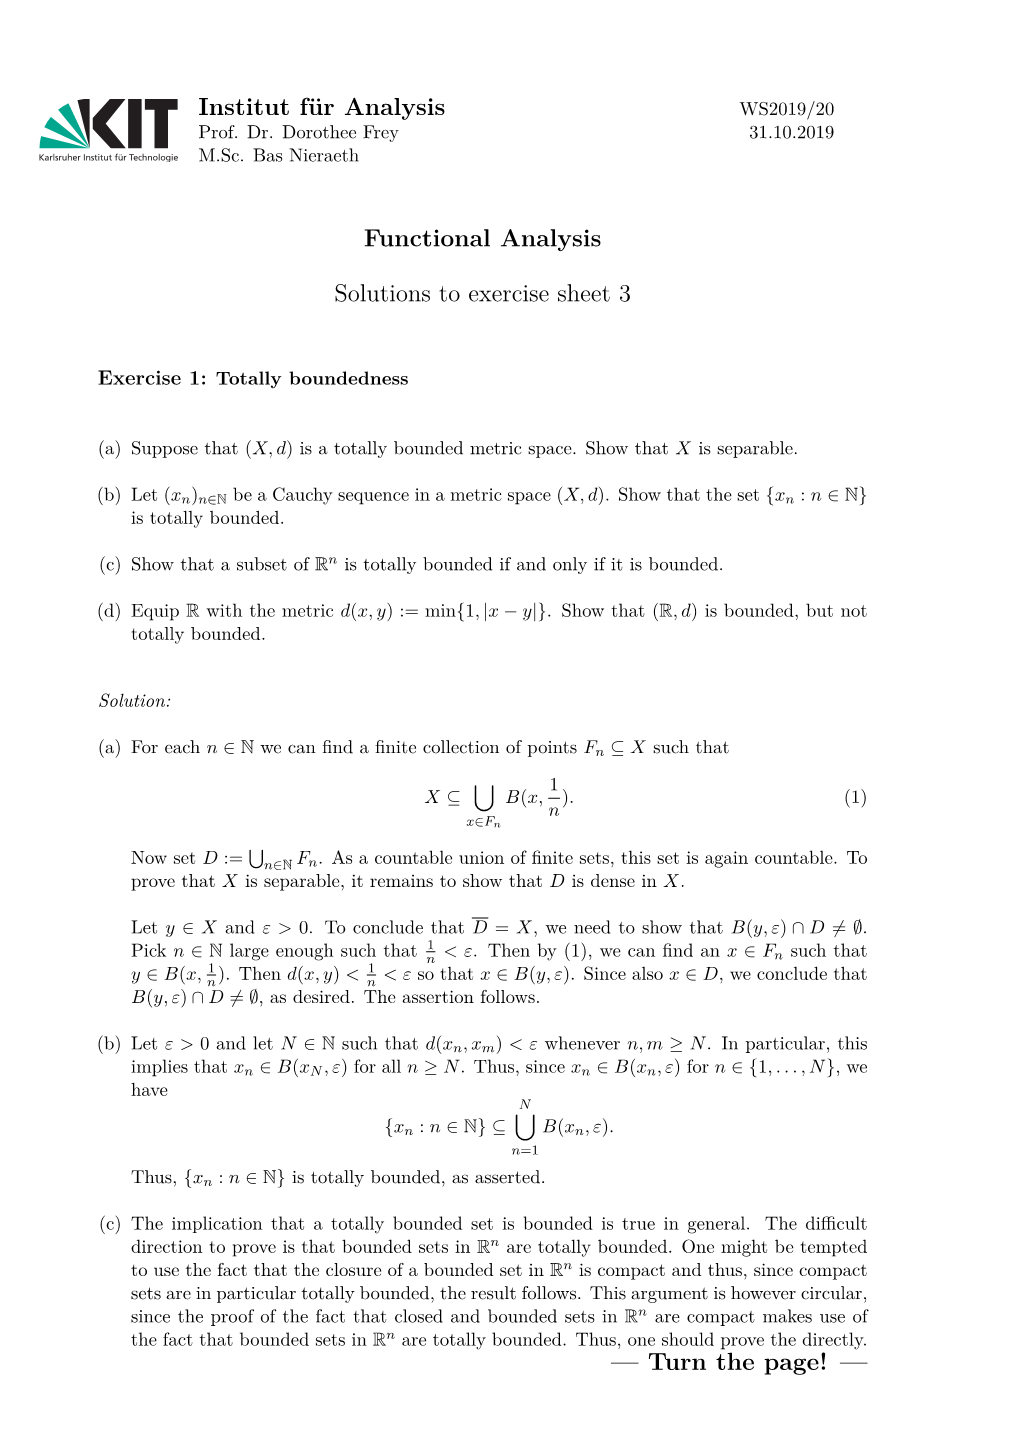 Functional Analysis Solutions to Exercise Sheet 3